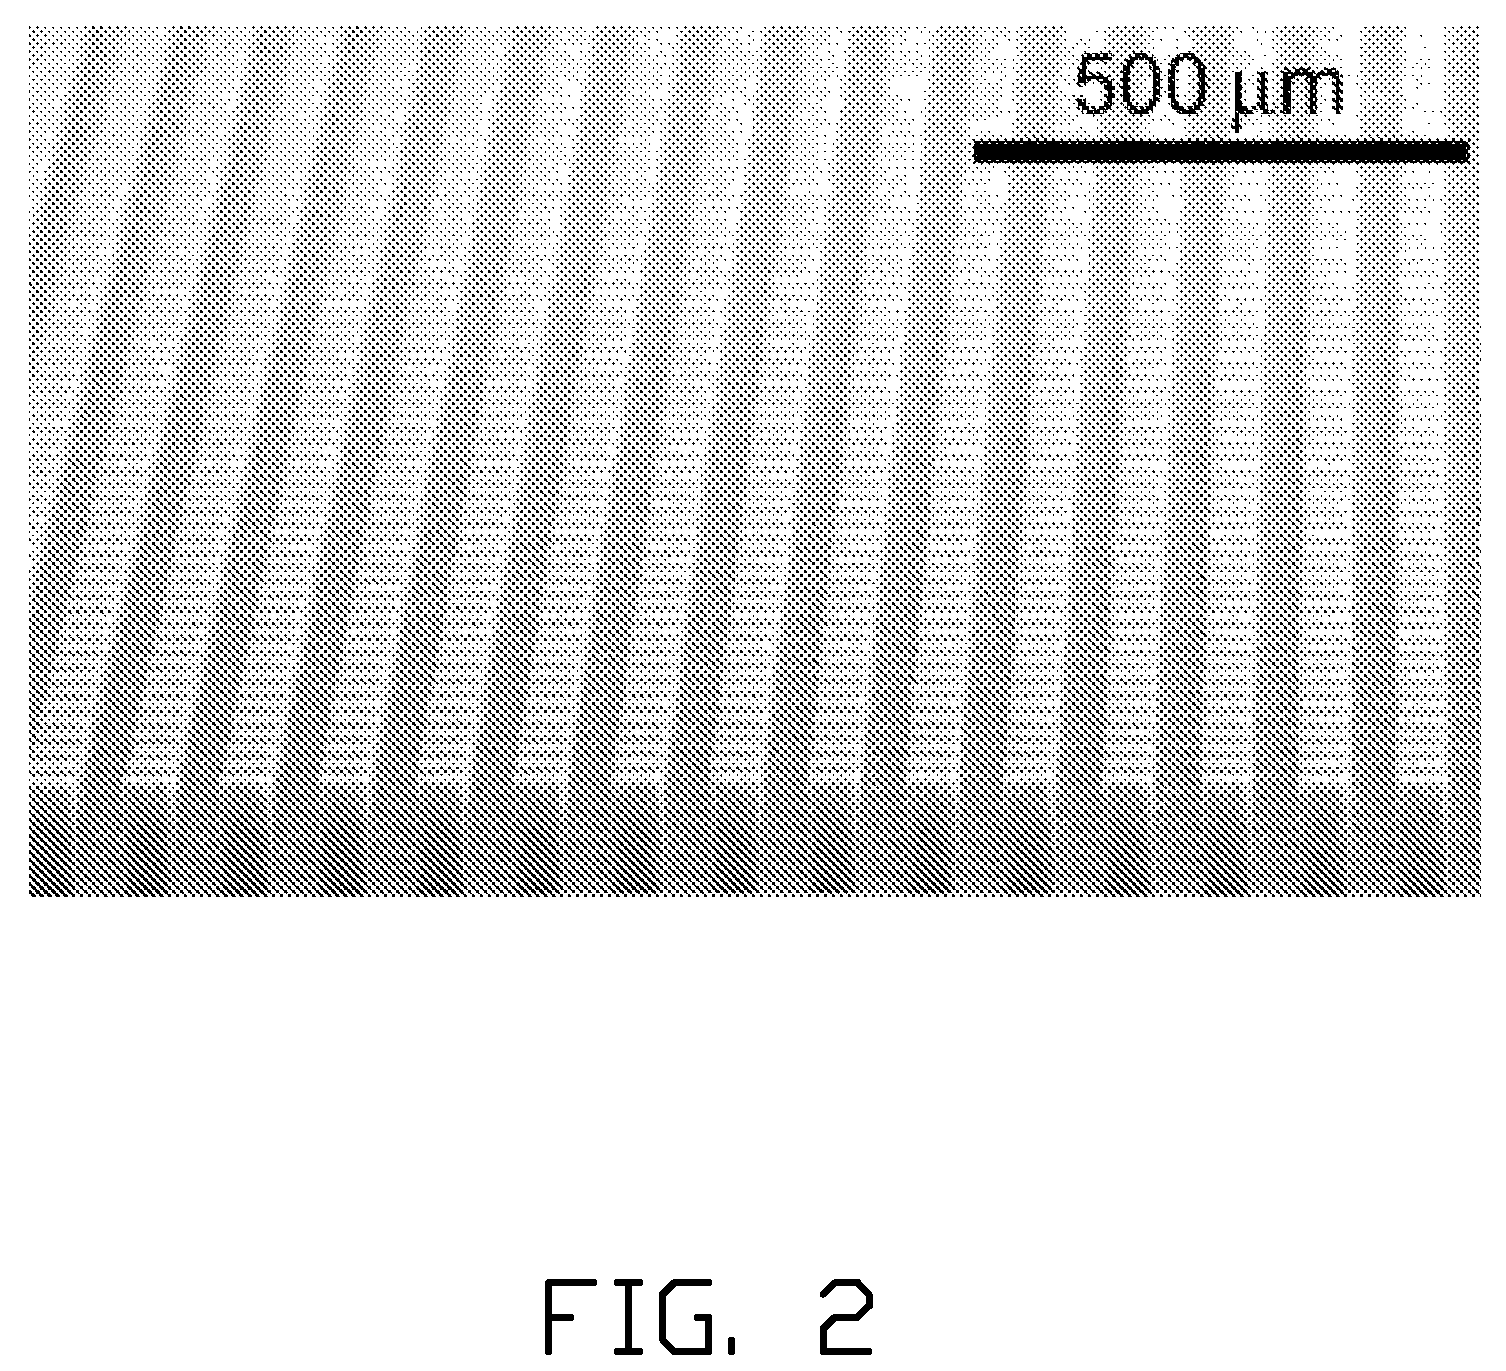 Method for measuring bonding force between substrate and carbon nanotube array formed thereon